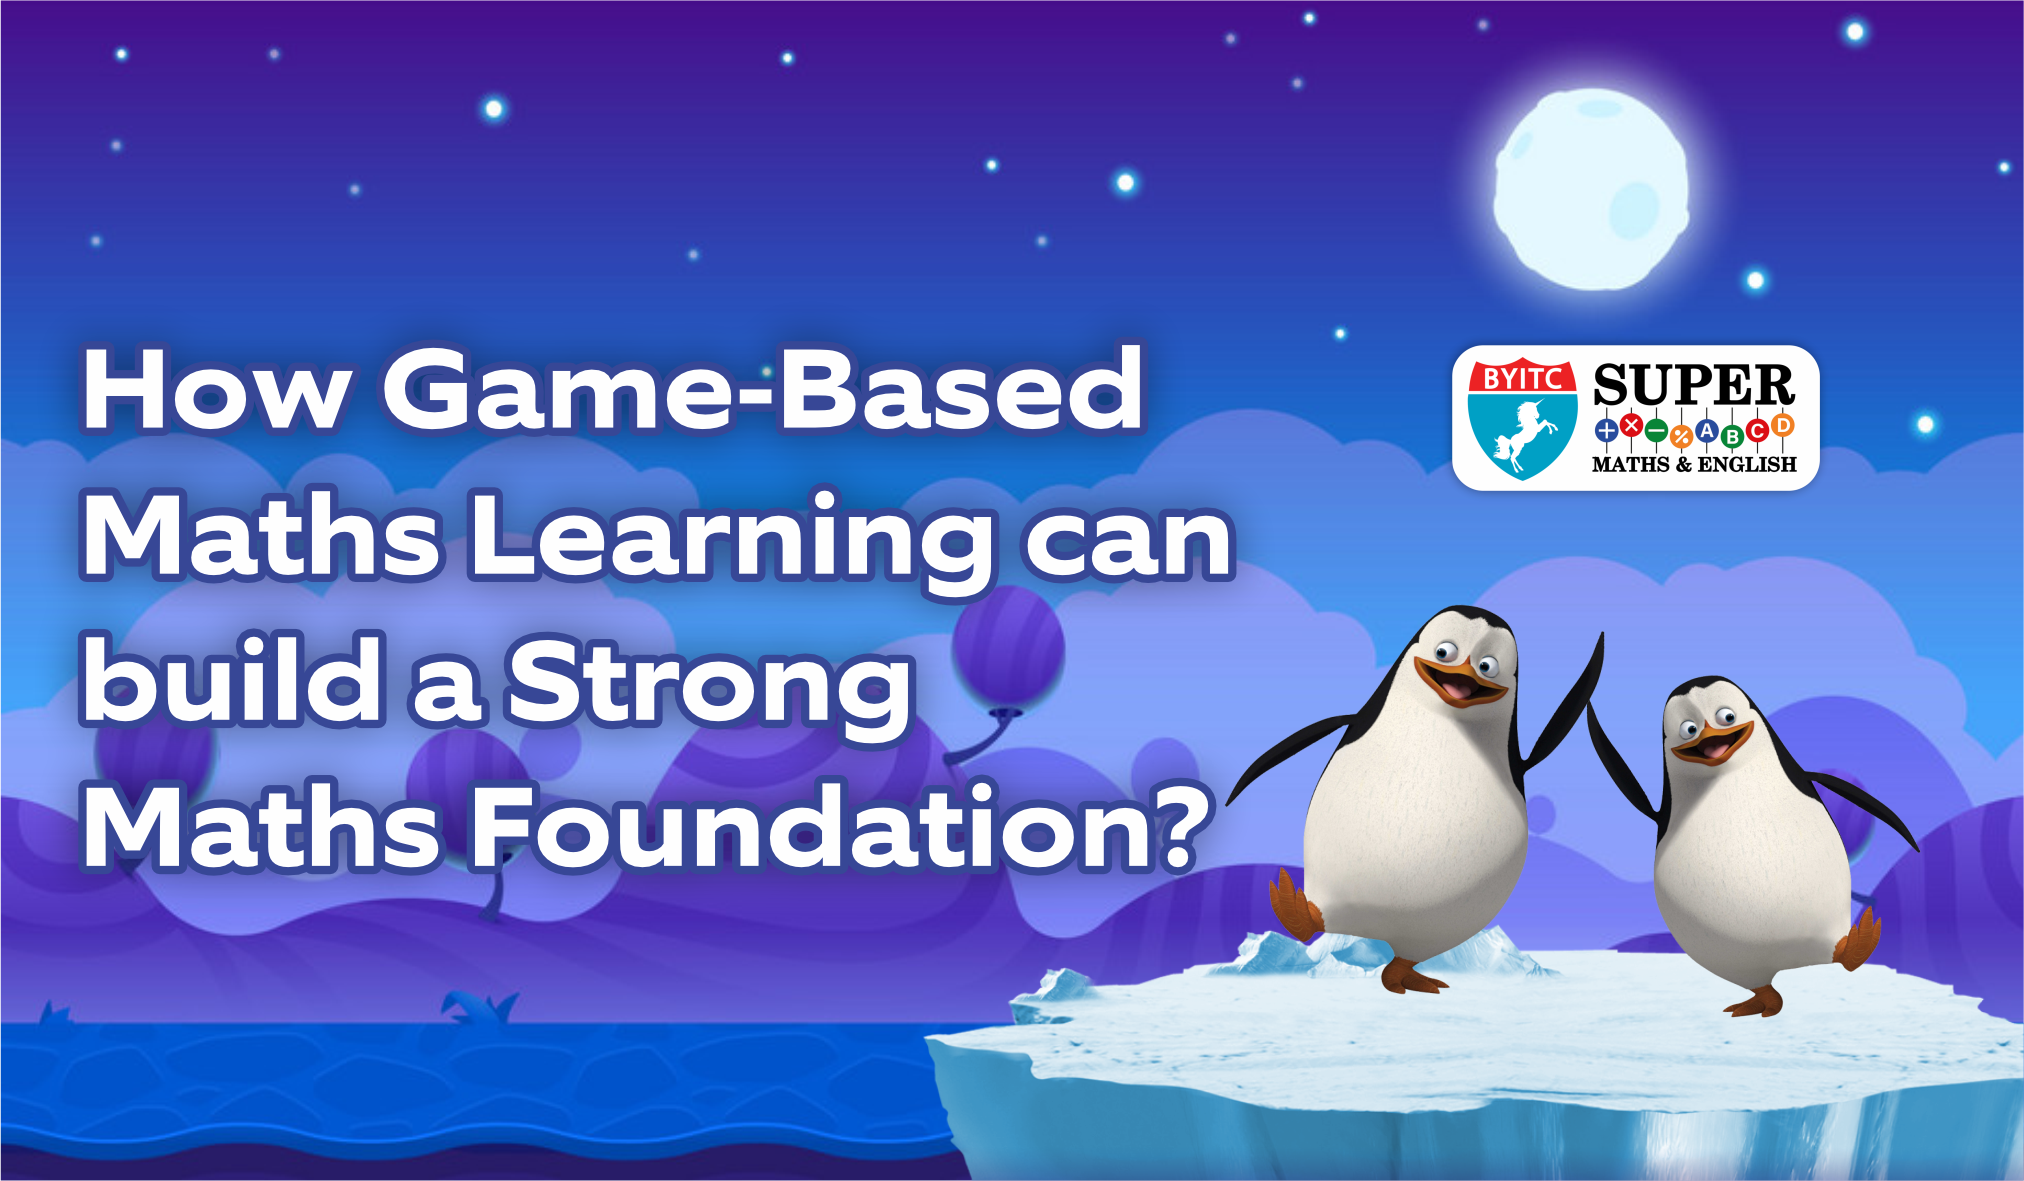 How Game-Based Maths Learning can build a Strong Maths Foundation?